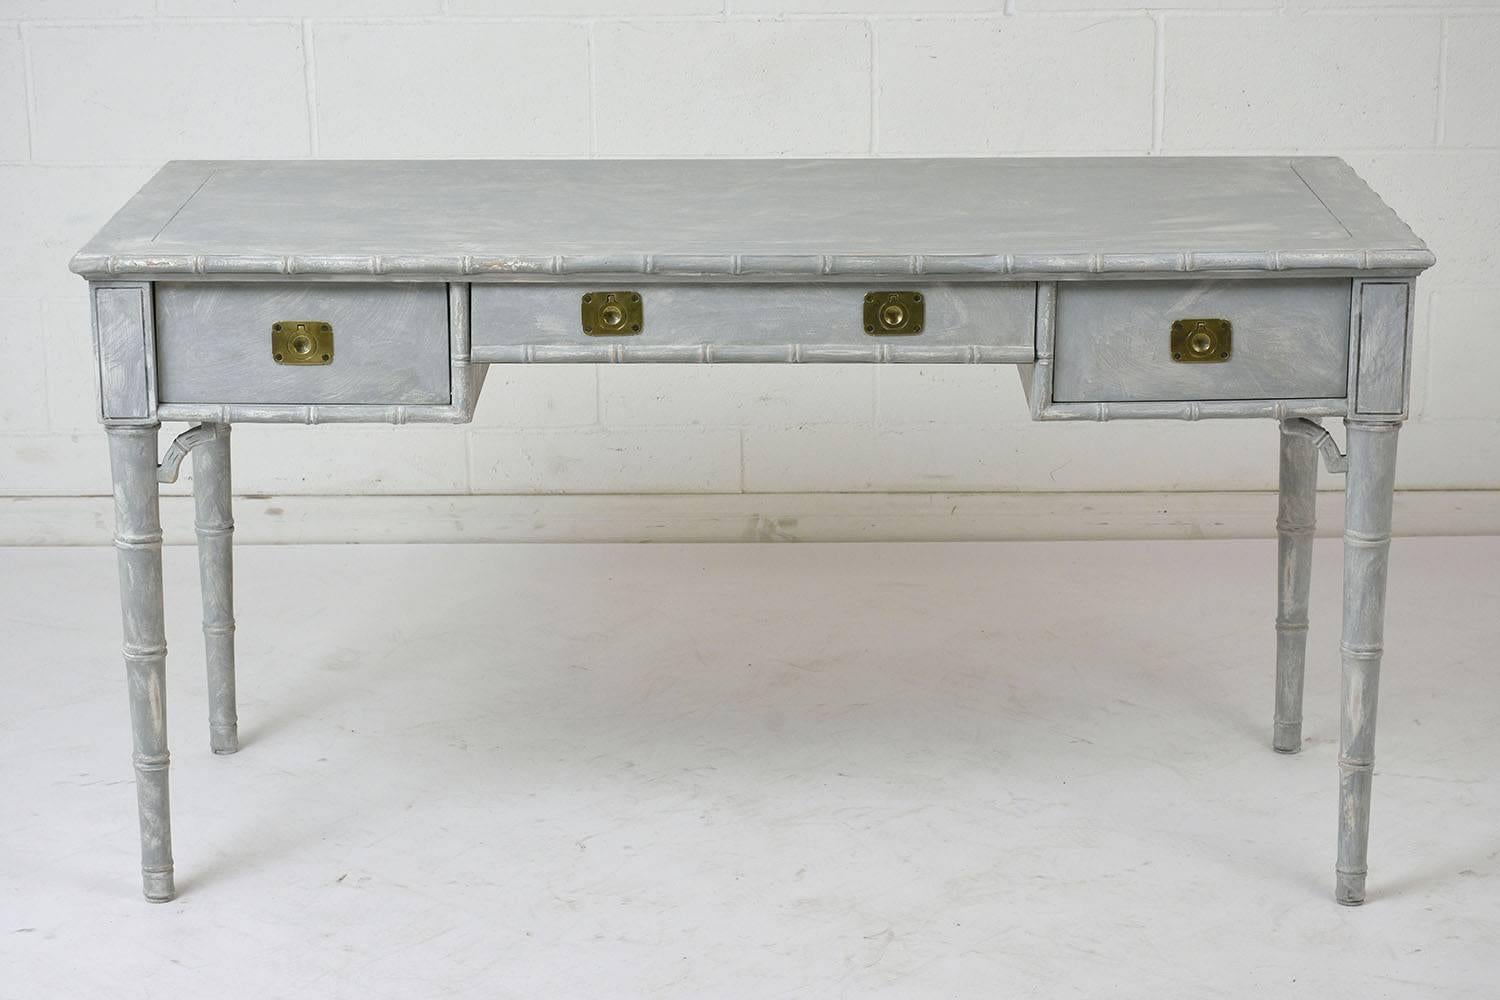 This 1970s modern-style desk is made of wood painted in a pale gray and oyster color combination with a distressed finish. The desk features moulding details carved to resemble bamboo. There are three drawers in the desk with flush brass drawer